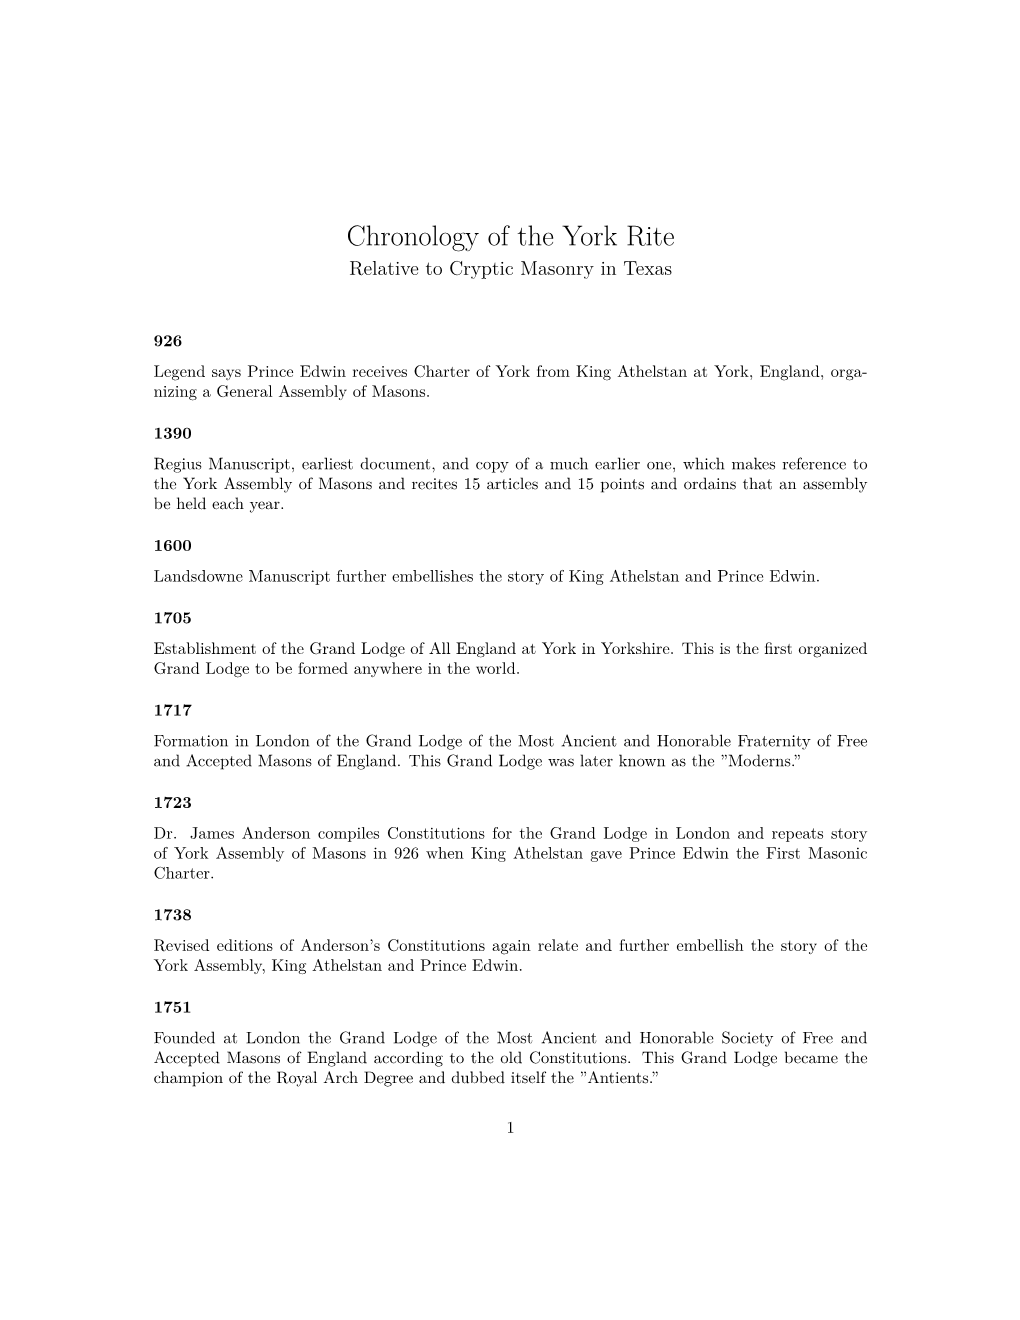 Chronology of the York Rite Relative to Cryptic Masonry in Texas